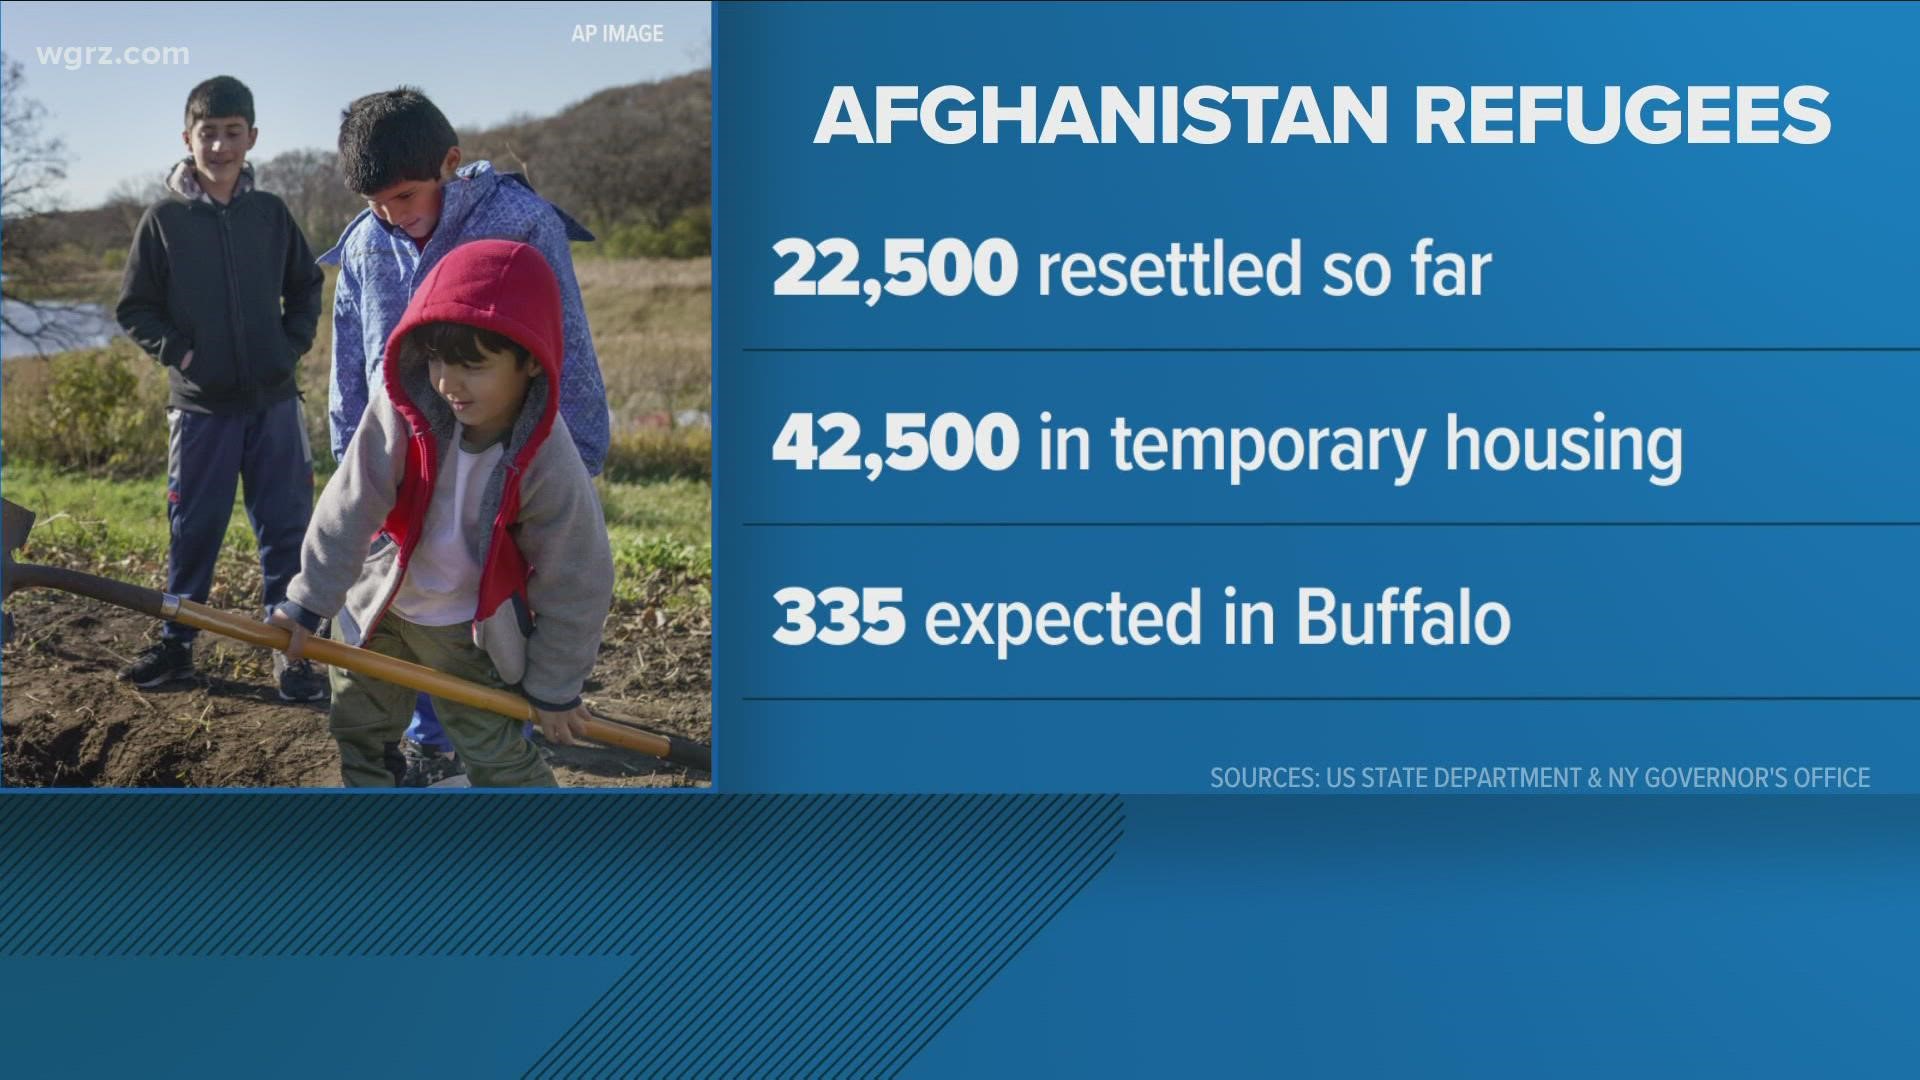 More than 22,000 refugees have been placed in new homes, all over the country. We know 335 of those Afghan refugees are expected to come here  to Buffalo.